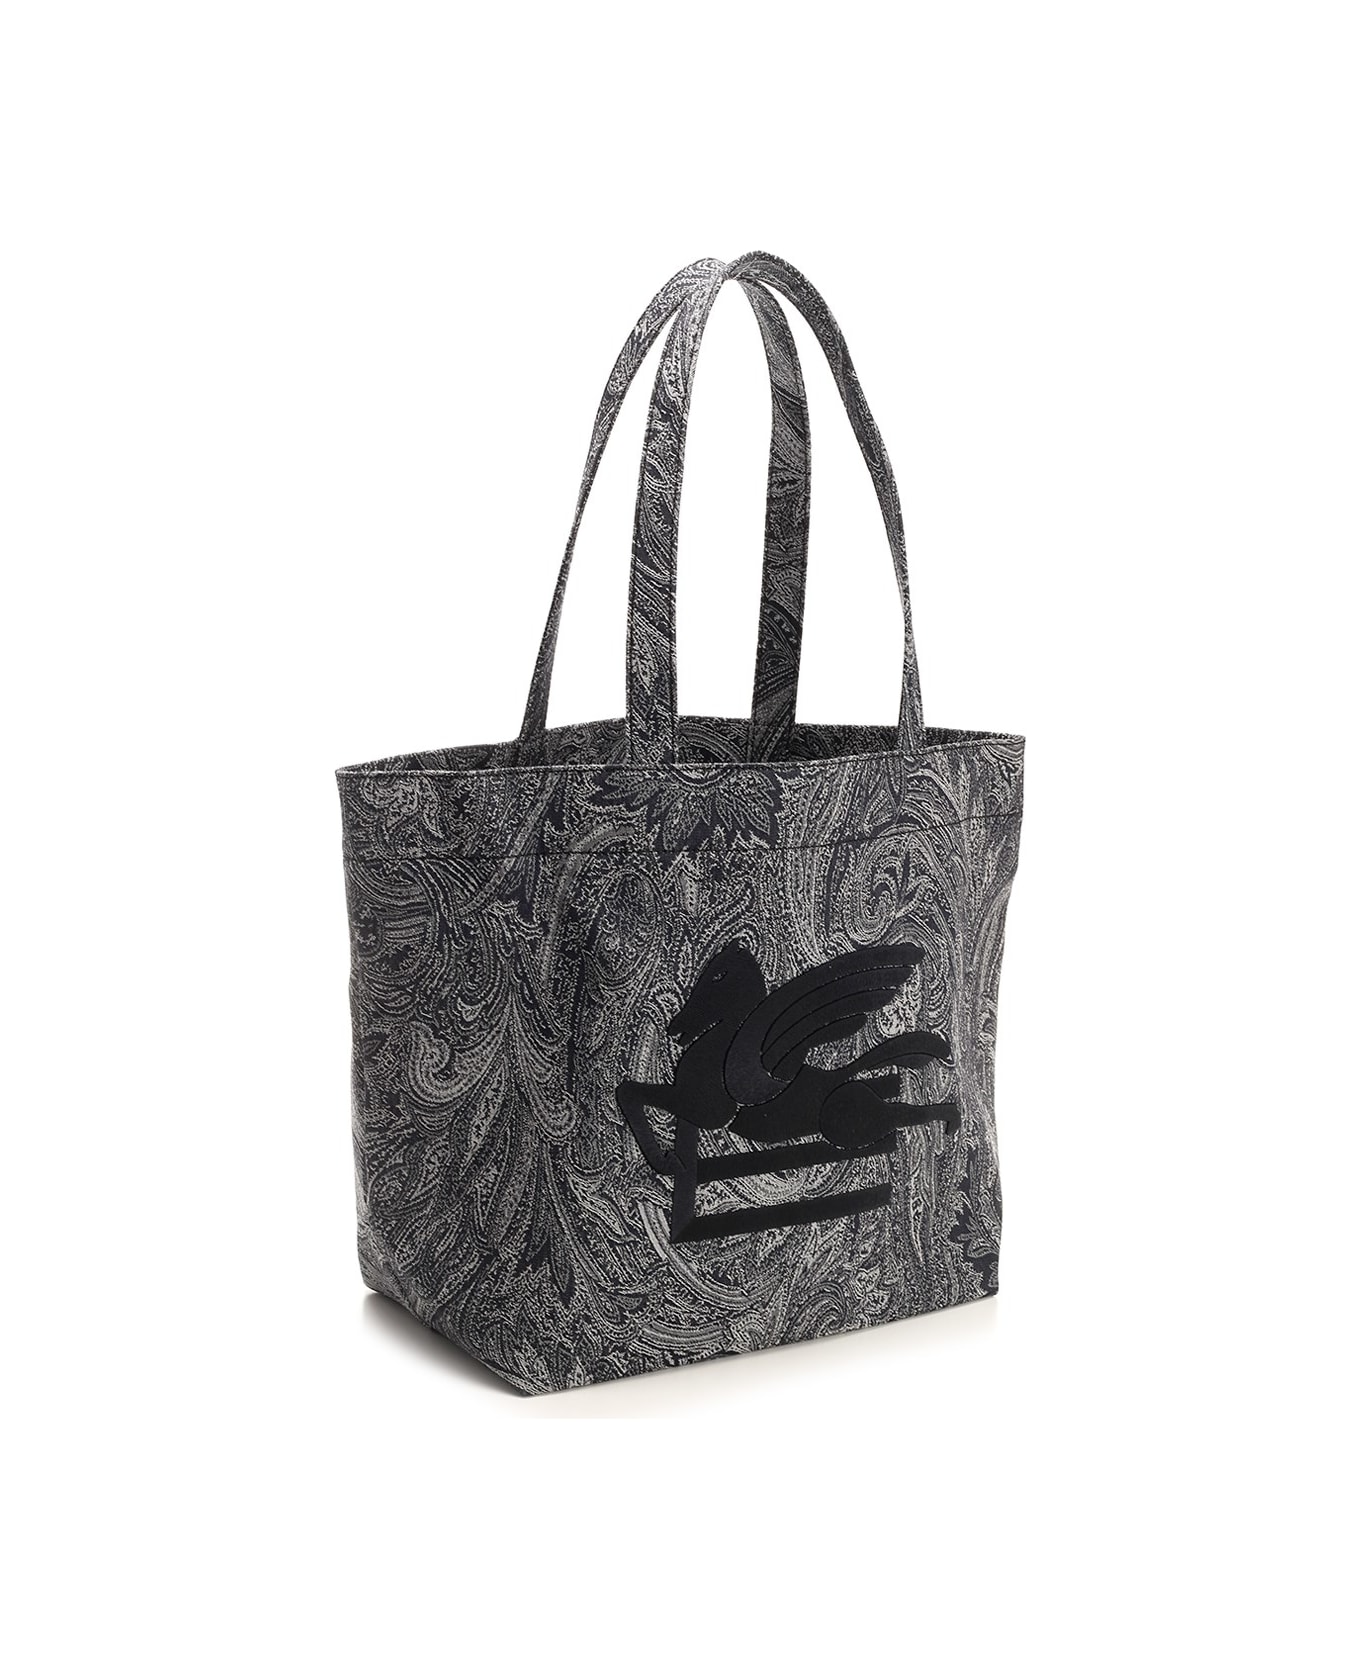 Etro Navy Blue Large Tote Bag With Paisley Jacquard Motif - Blue